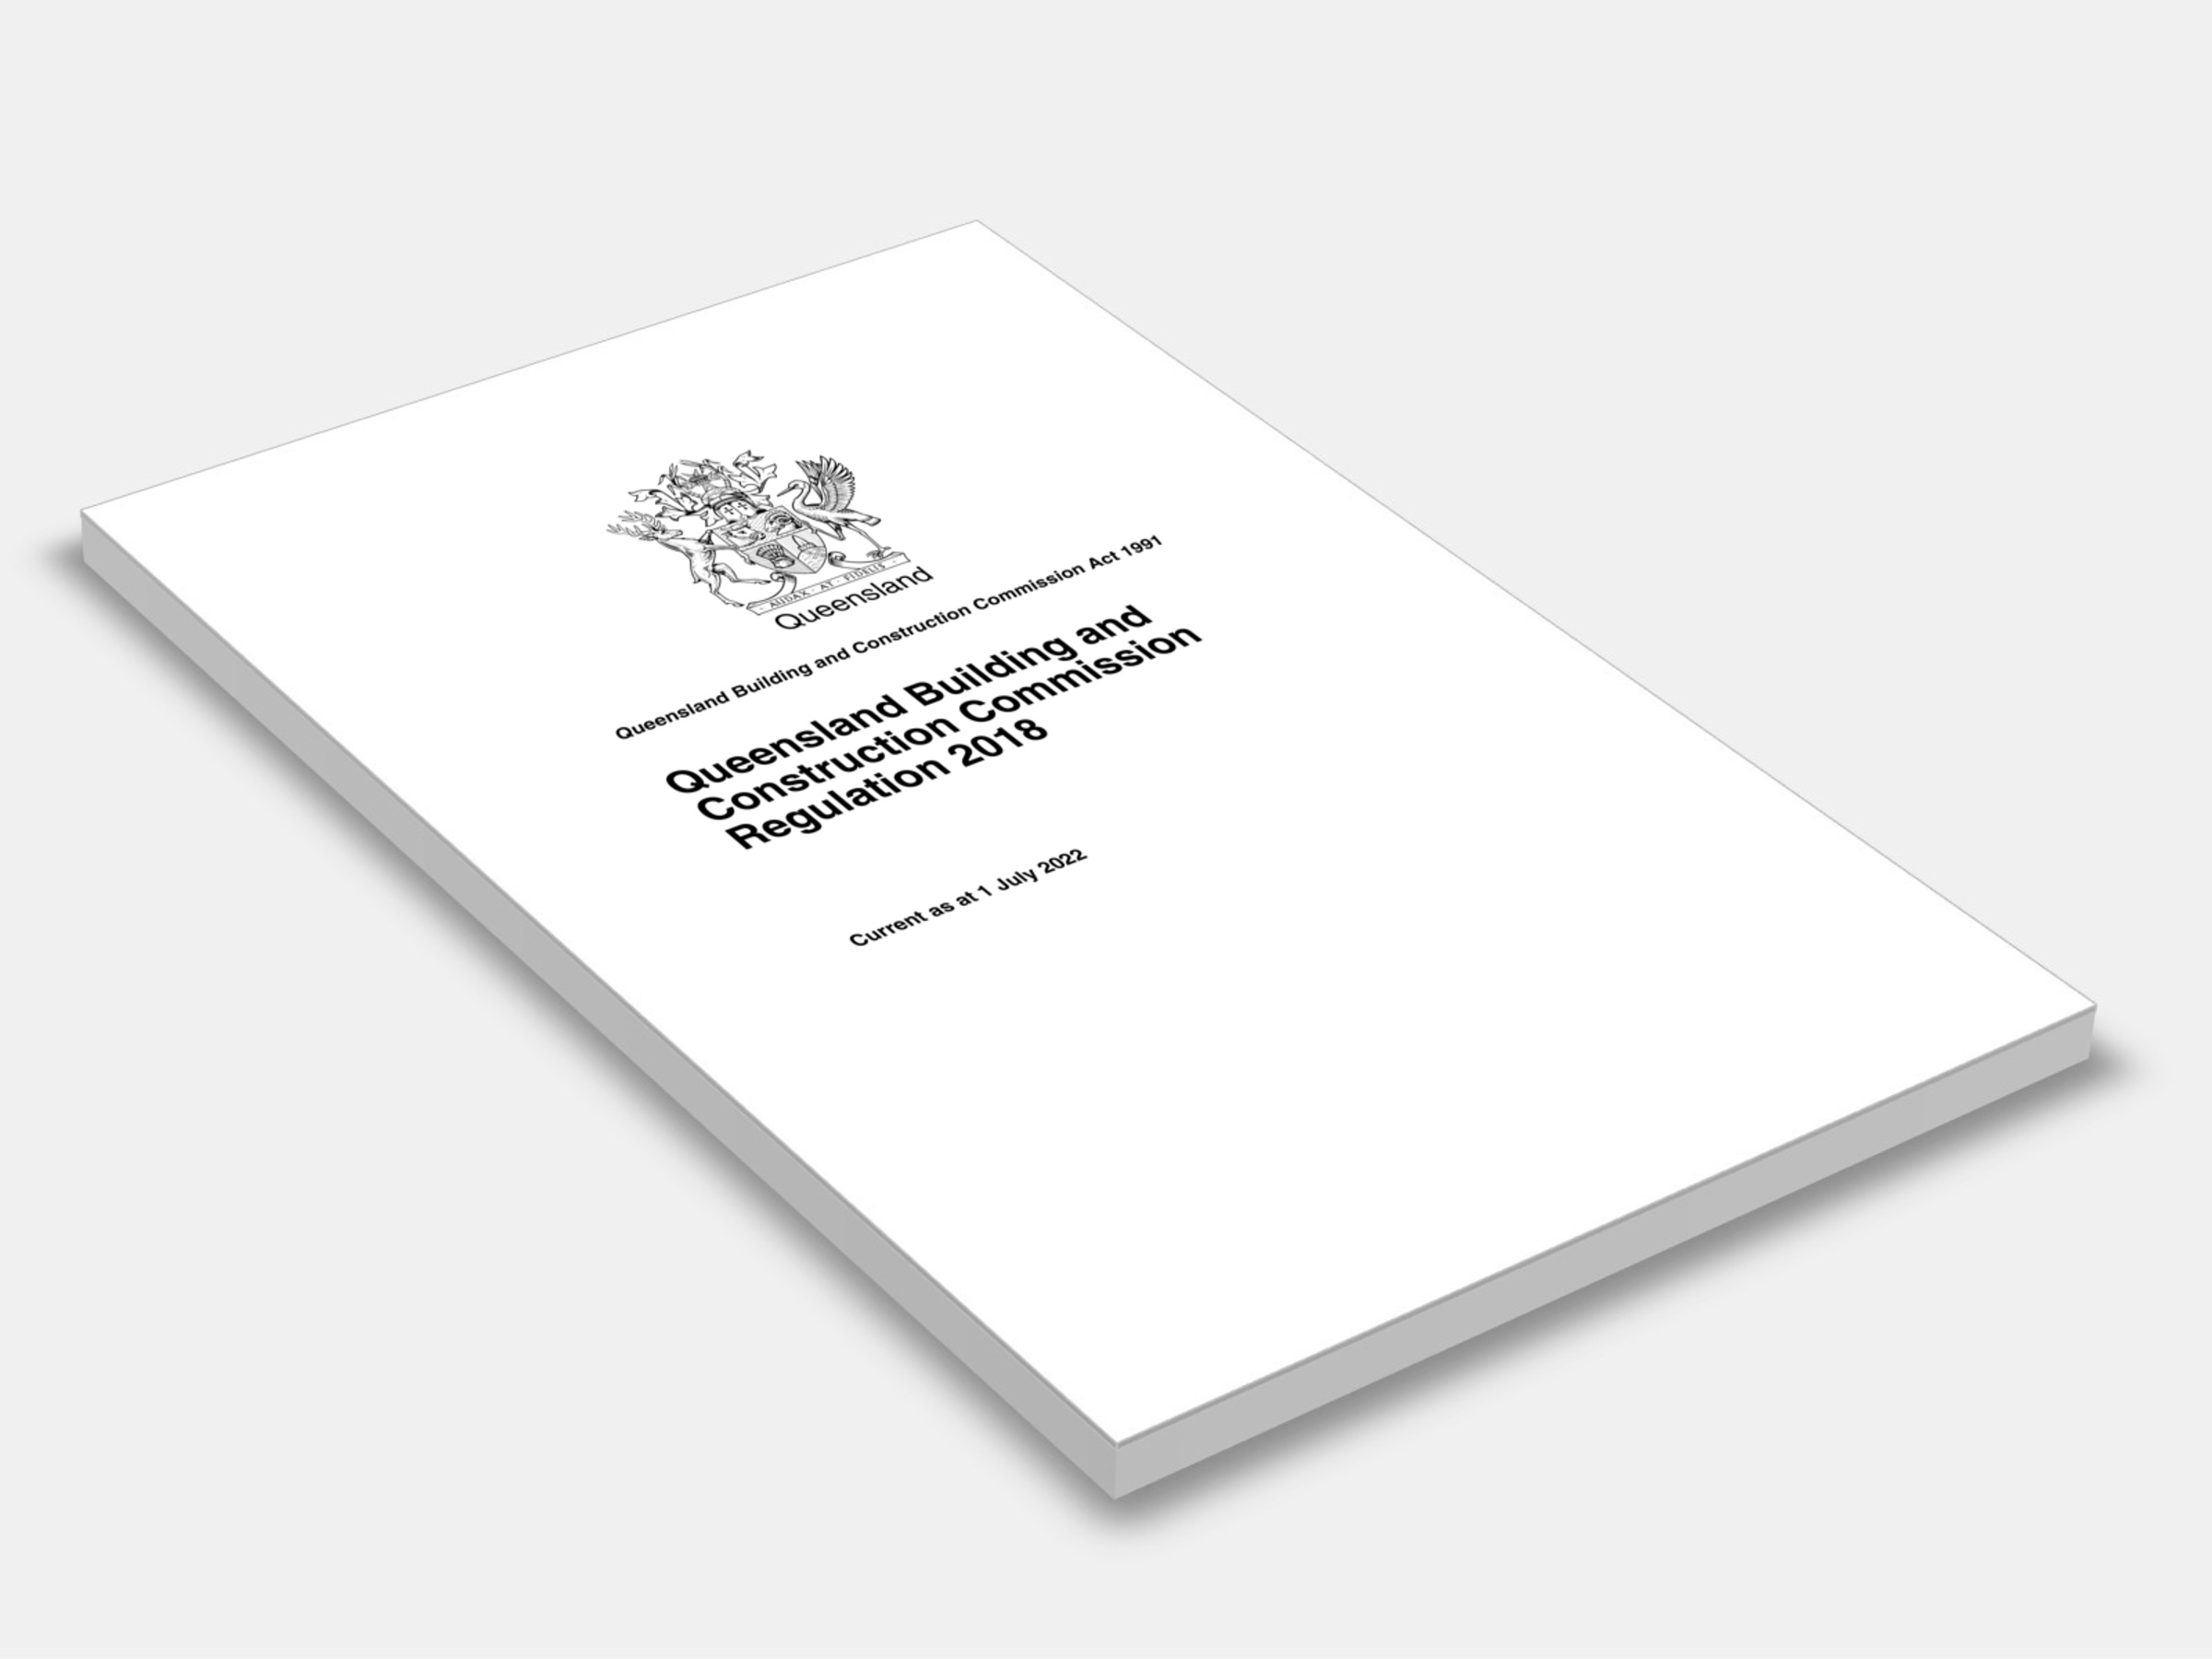 Queensland Building and Construction Commission Regulation 2018 (QLD) 2018 cover